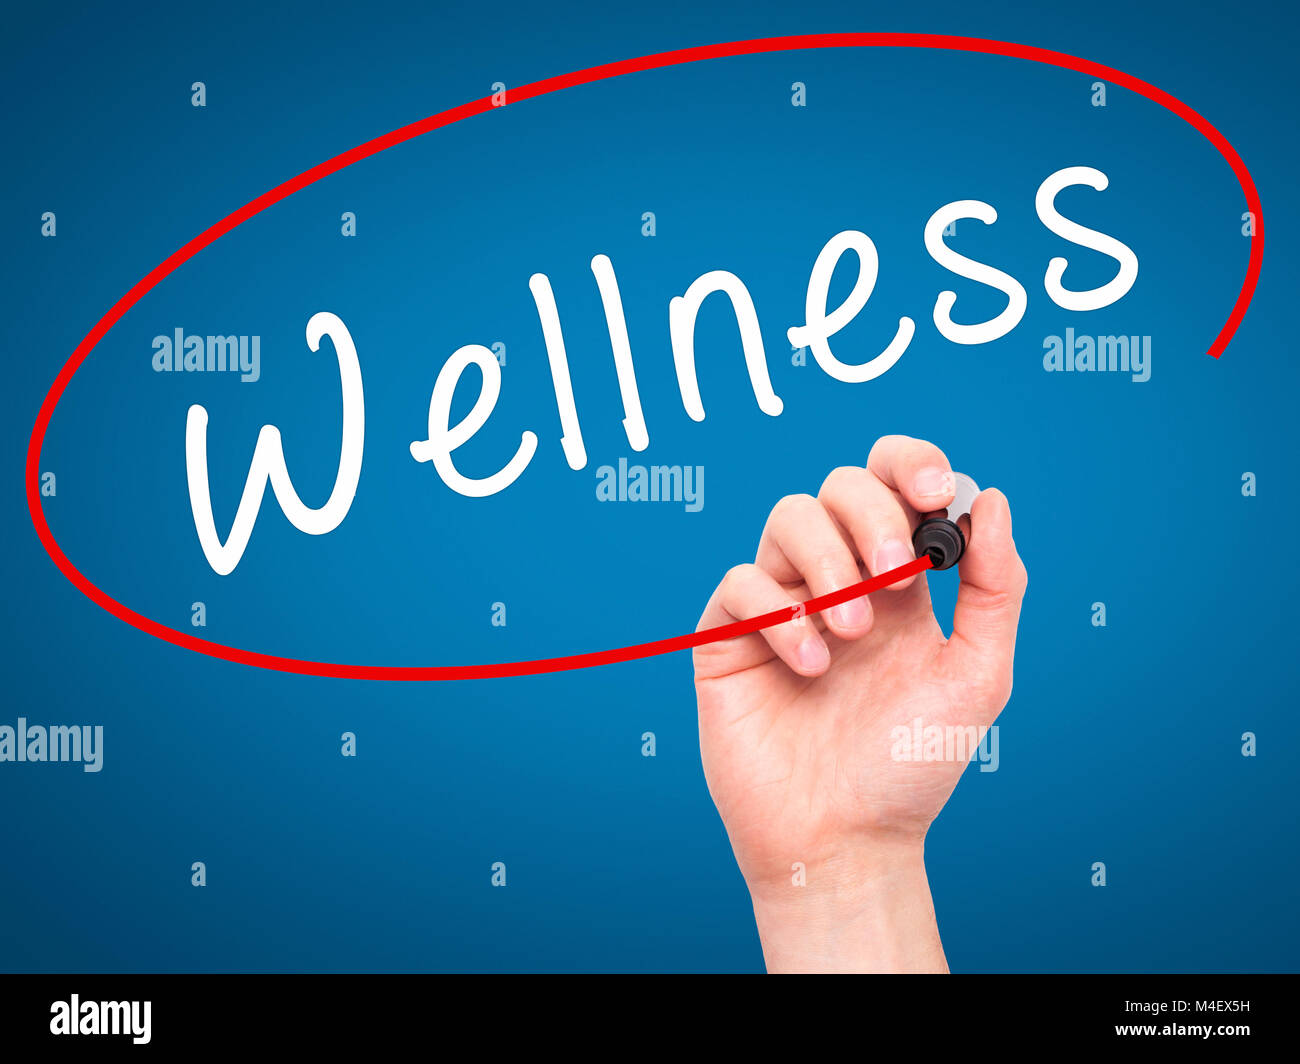 Man Hand writing Wellness with marker on transparent wipe board Stock Photo